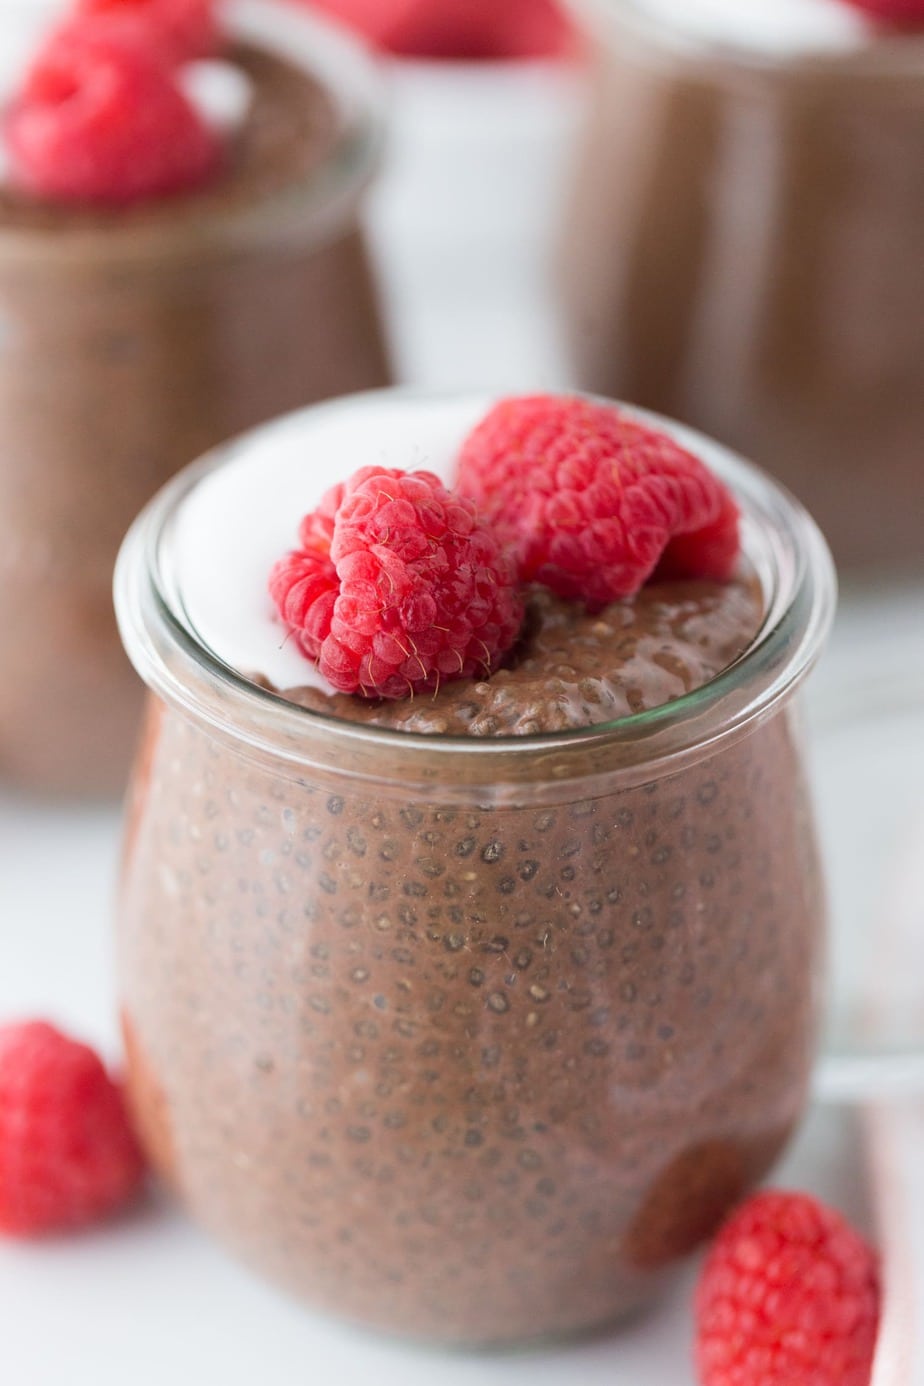 https://confessionsofafitfoodie.com/wp-content/uploads/2020/02/Chia-Pudding-62.jpg